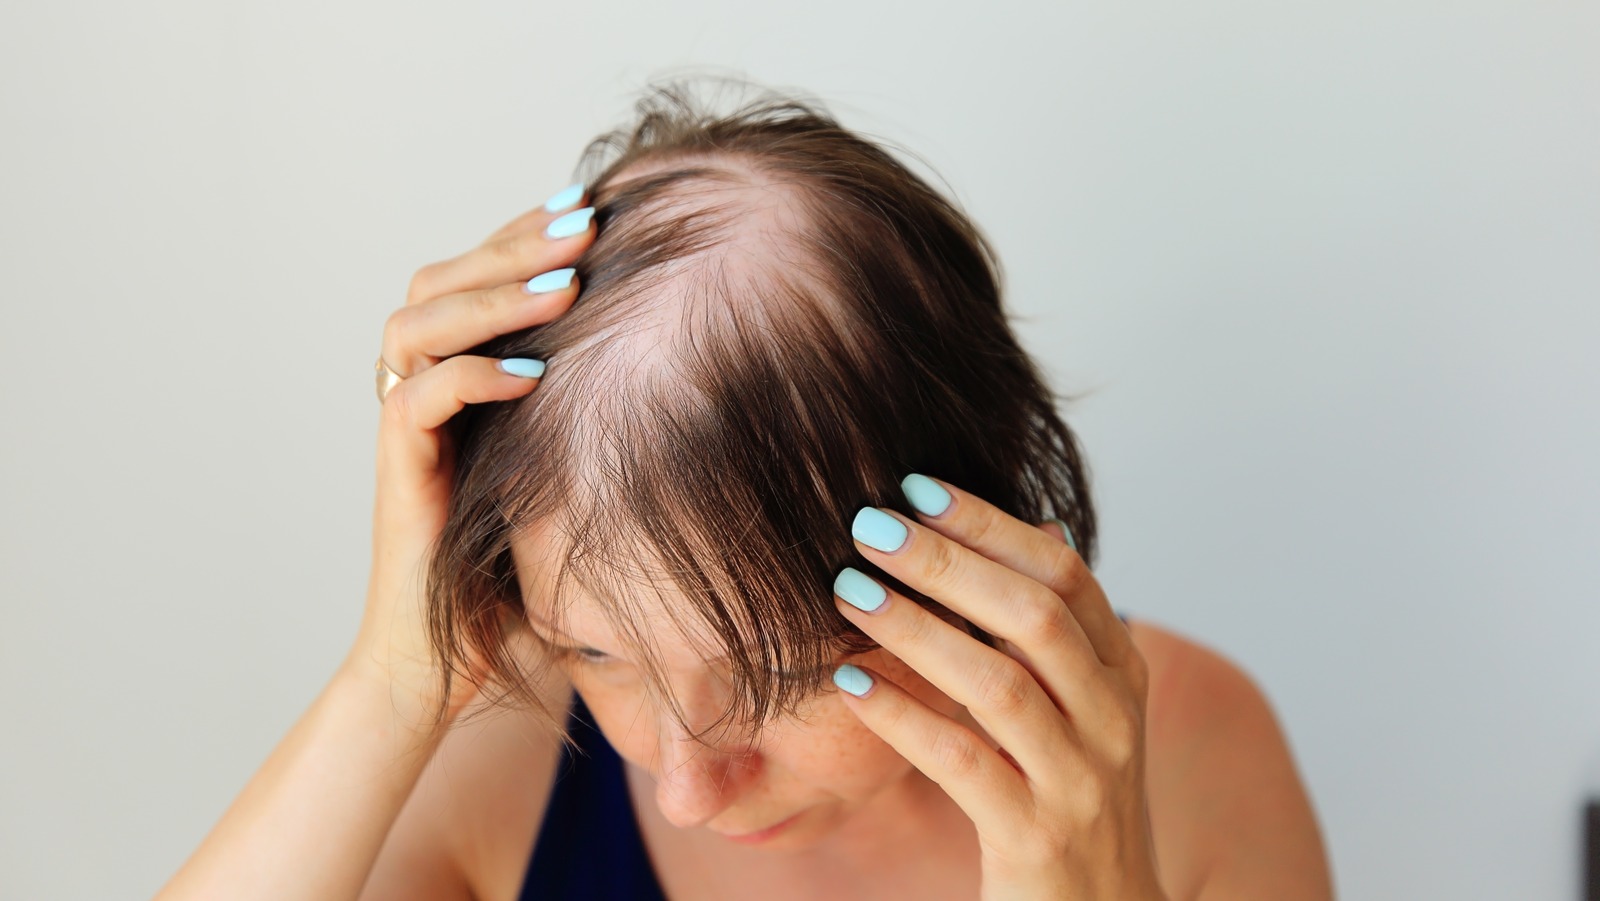 Do Vitamins For Hair Loss Actually Do Anything?